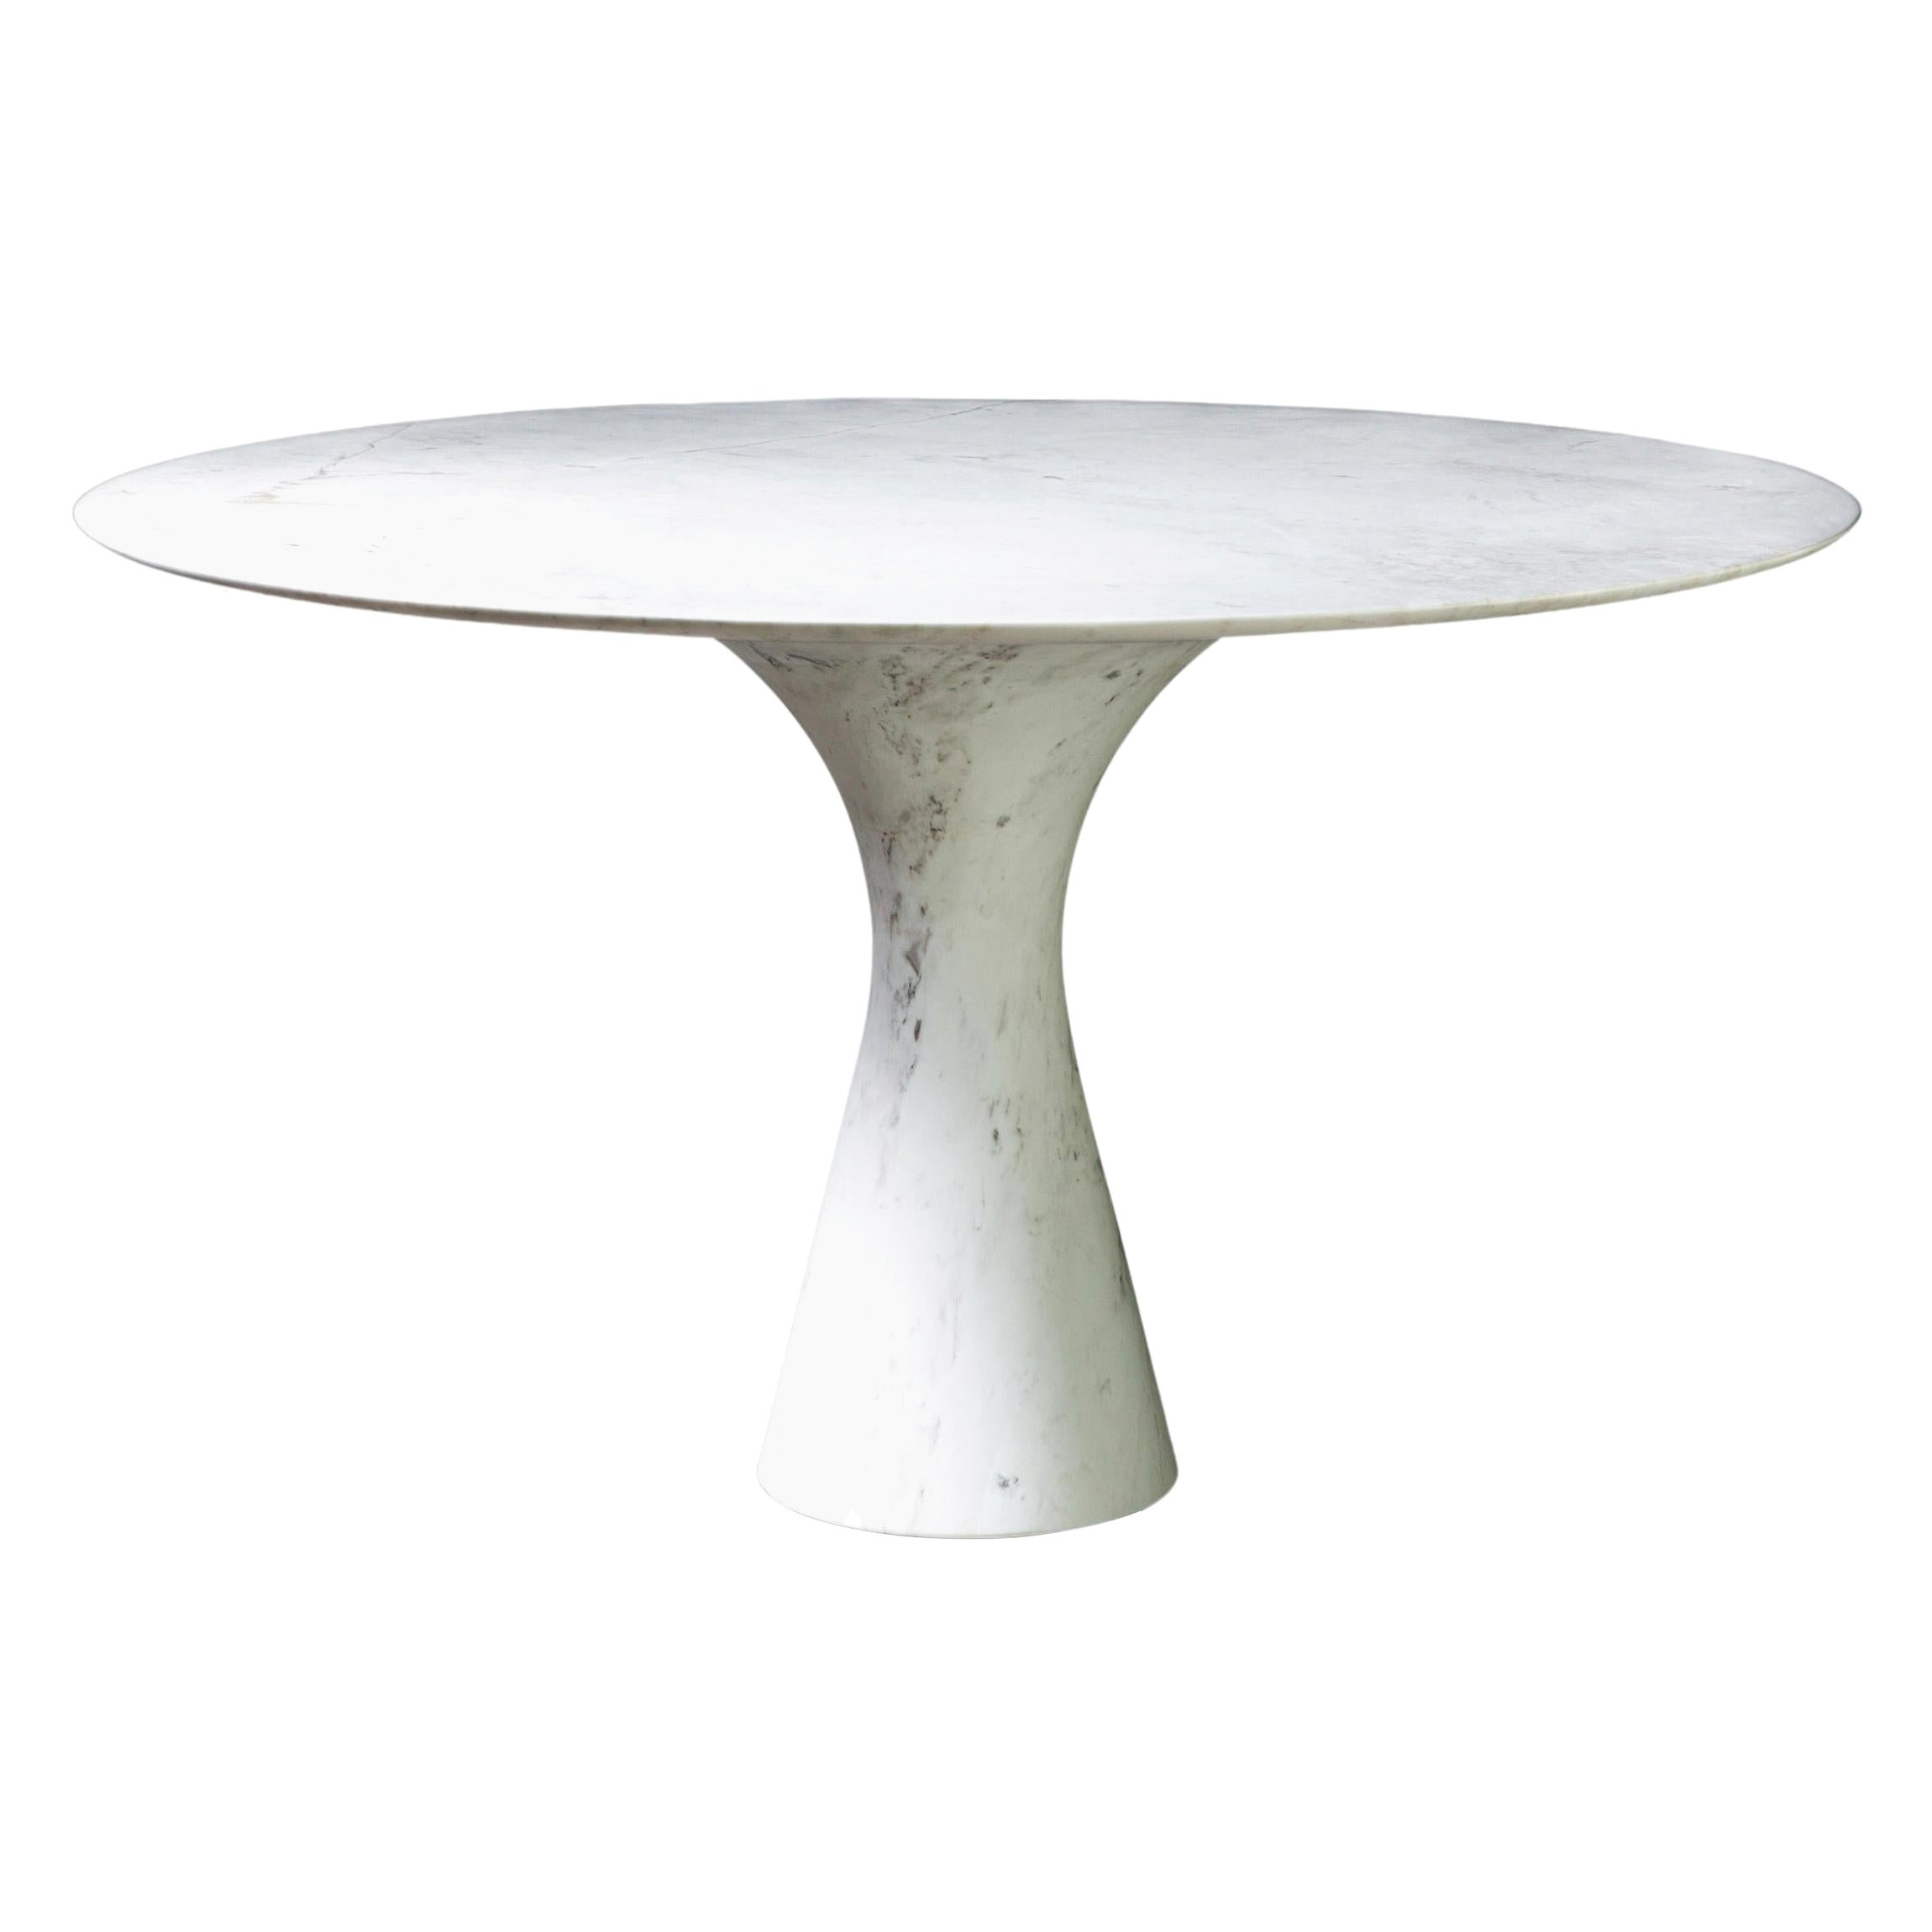 Kynos Refined Contemporary Marble Dining Table 180/75